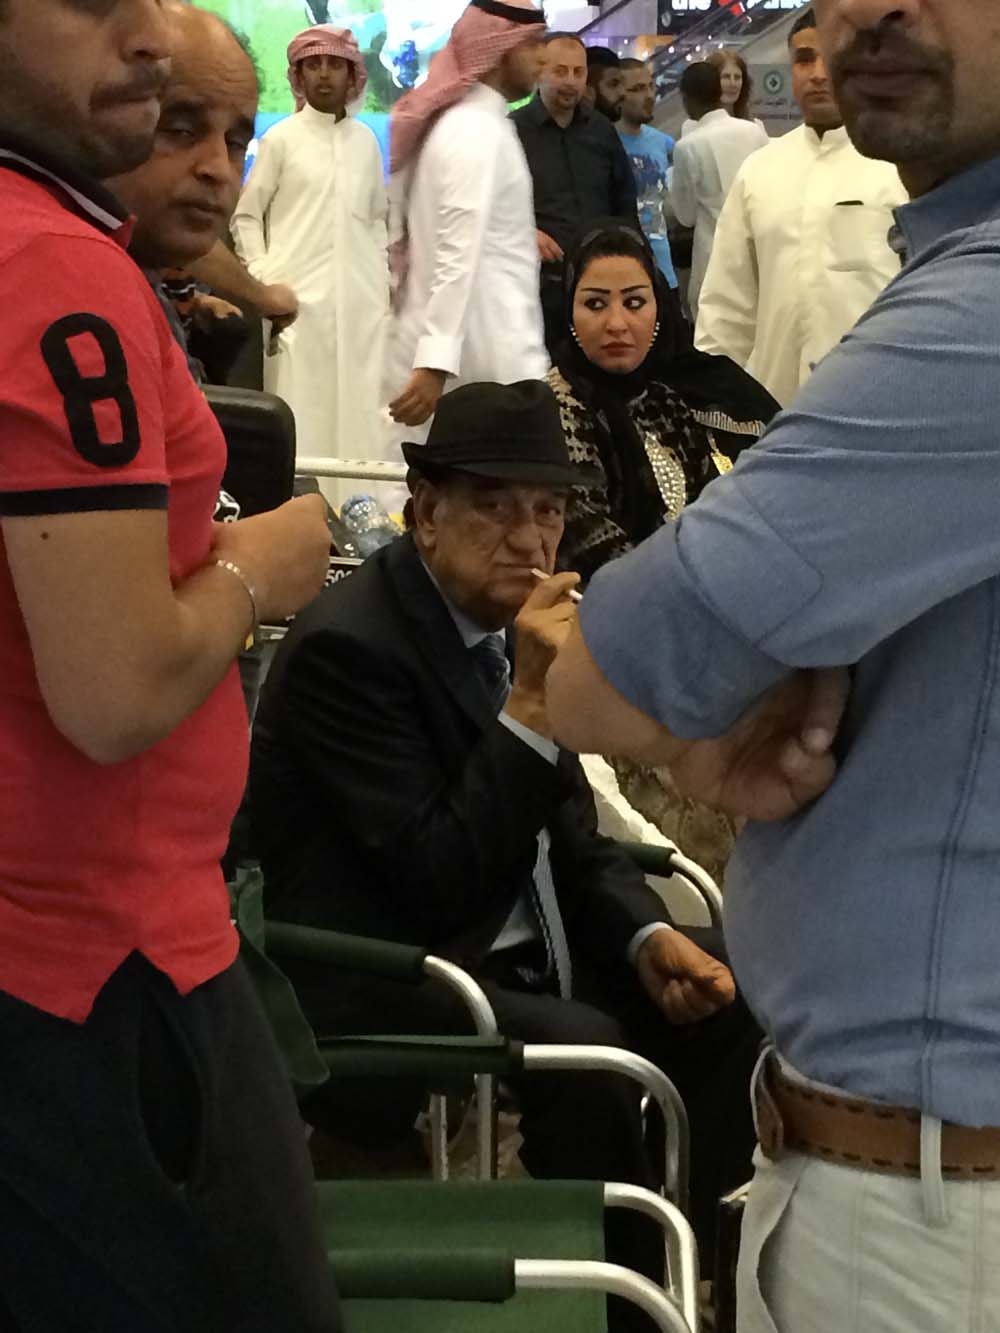 mayhem in kuwait airport. confetti, balloons being popped, bright lights...and this egyptian actor. they were filming a series. i don't think this guy's too happy he's being photographed by a crazy chick in black